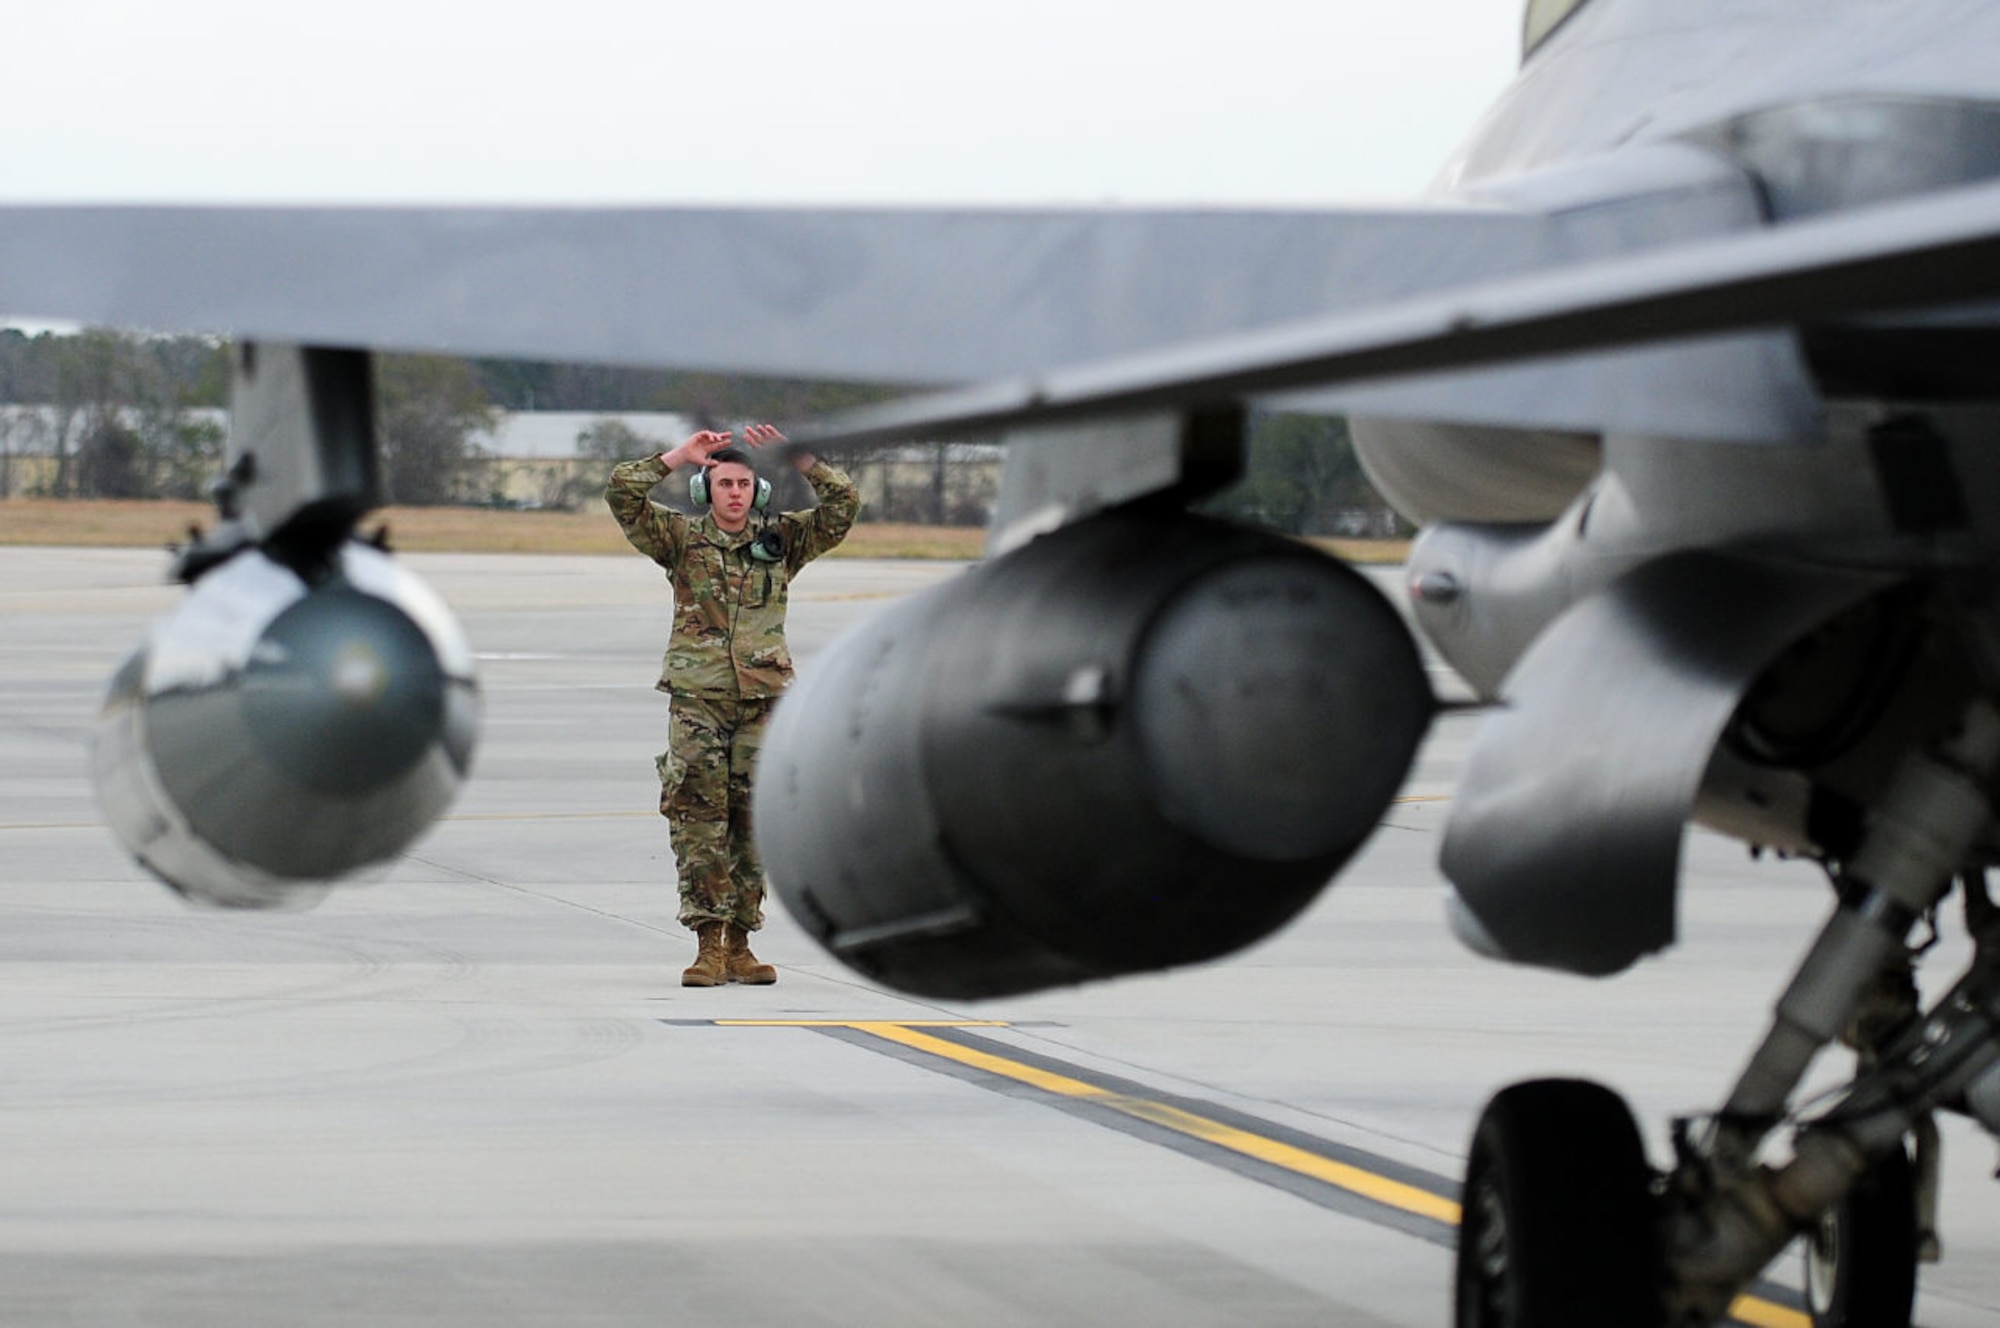 A crew chief from the 148th Fighter Wing recovers a Block 50CM, F-16 while deployed in support of a NORAD tasked Operation NOBLE EAGLE mission. NORAD conducts aerospace warning, aerospace control and maritime warning in the defense of North America. (U.S. Air National Guard photo by Master Sgt. Tom Krob)